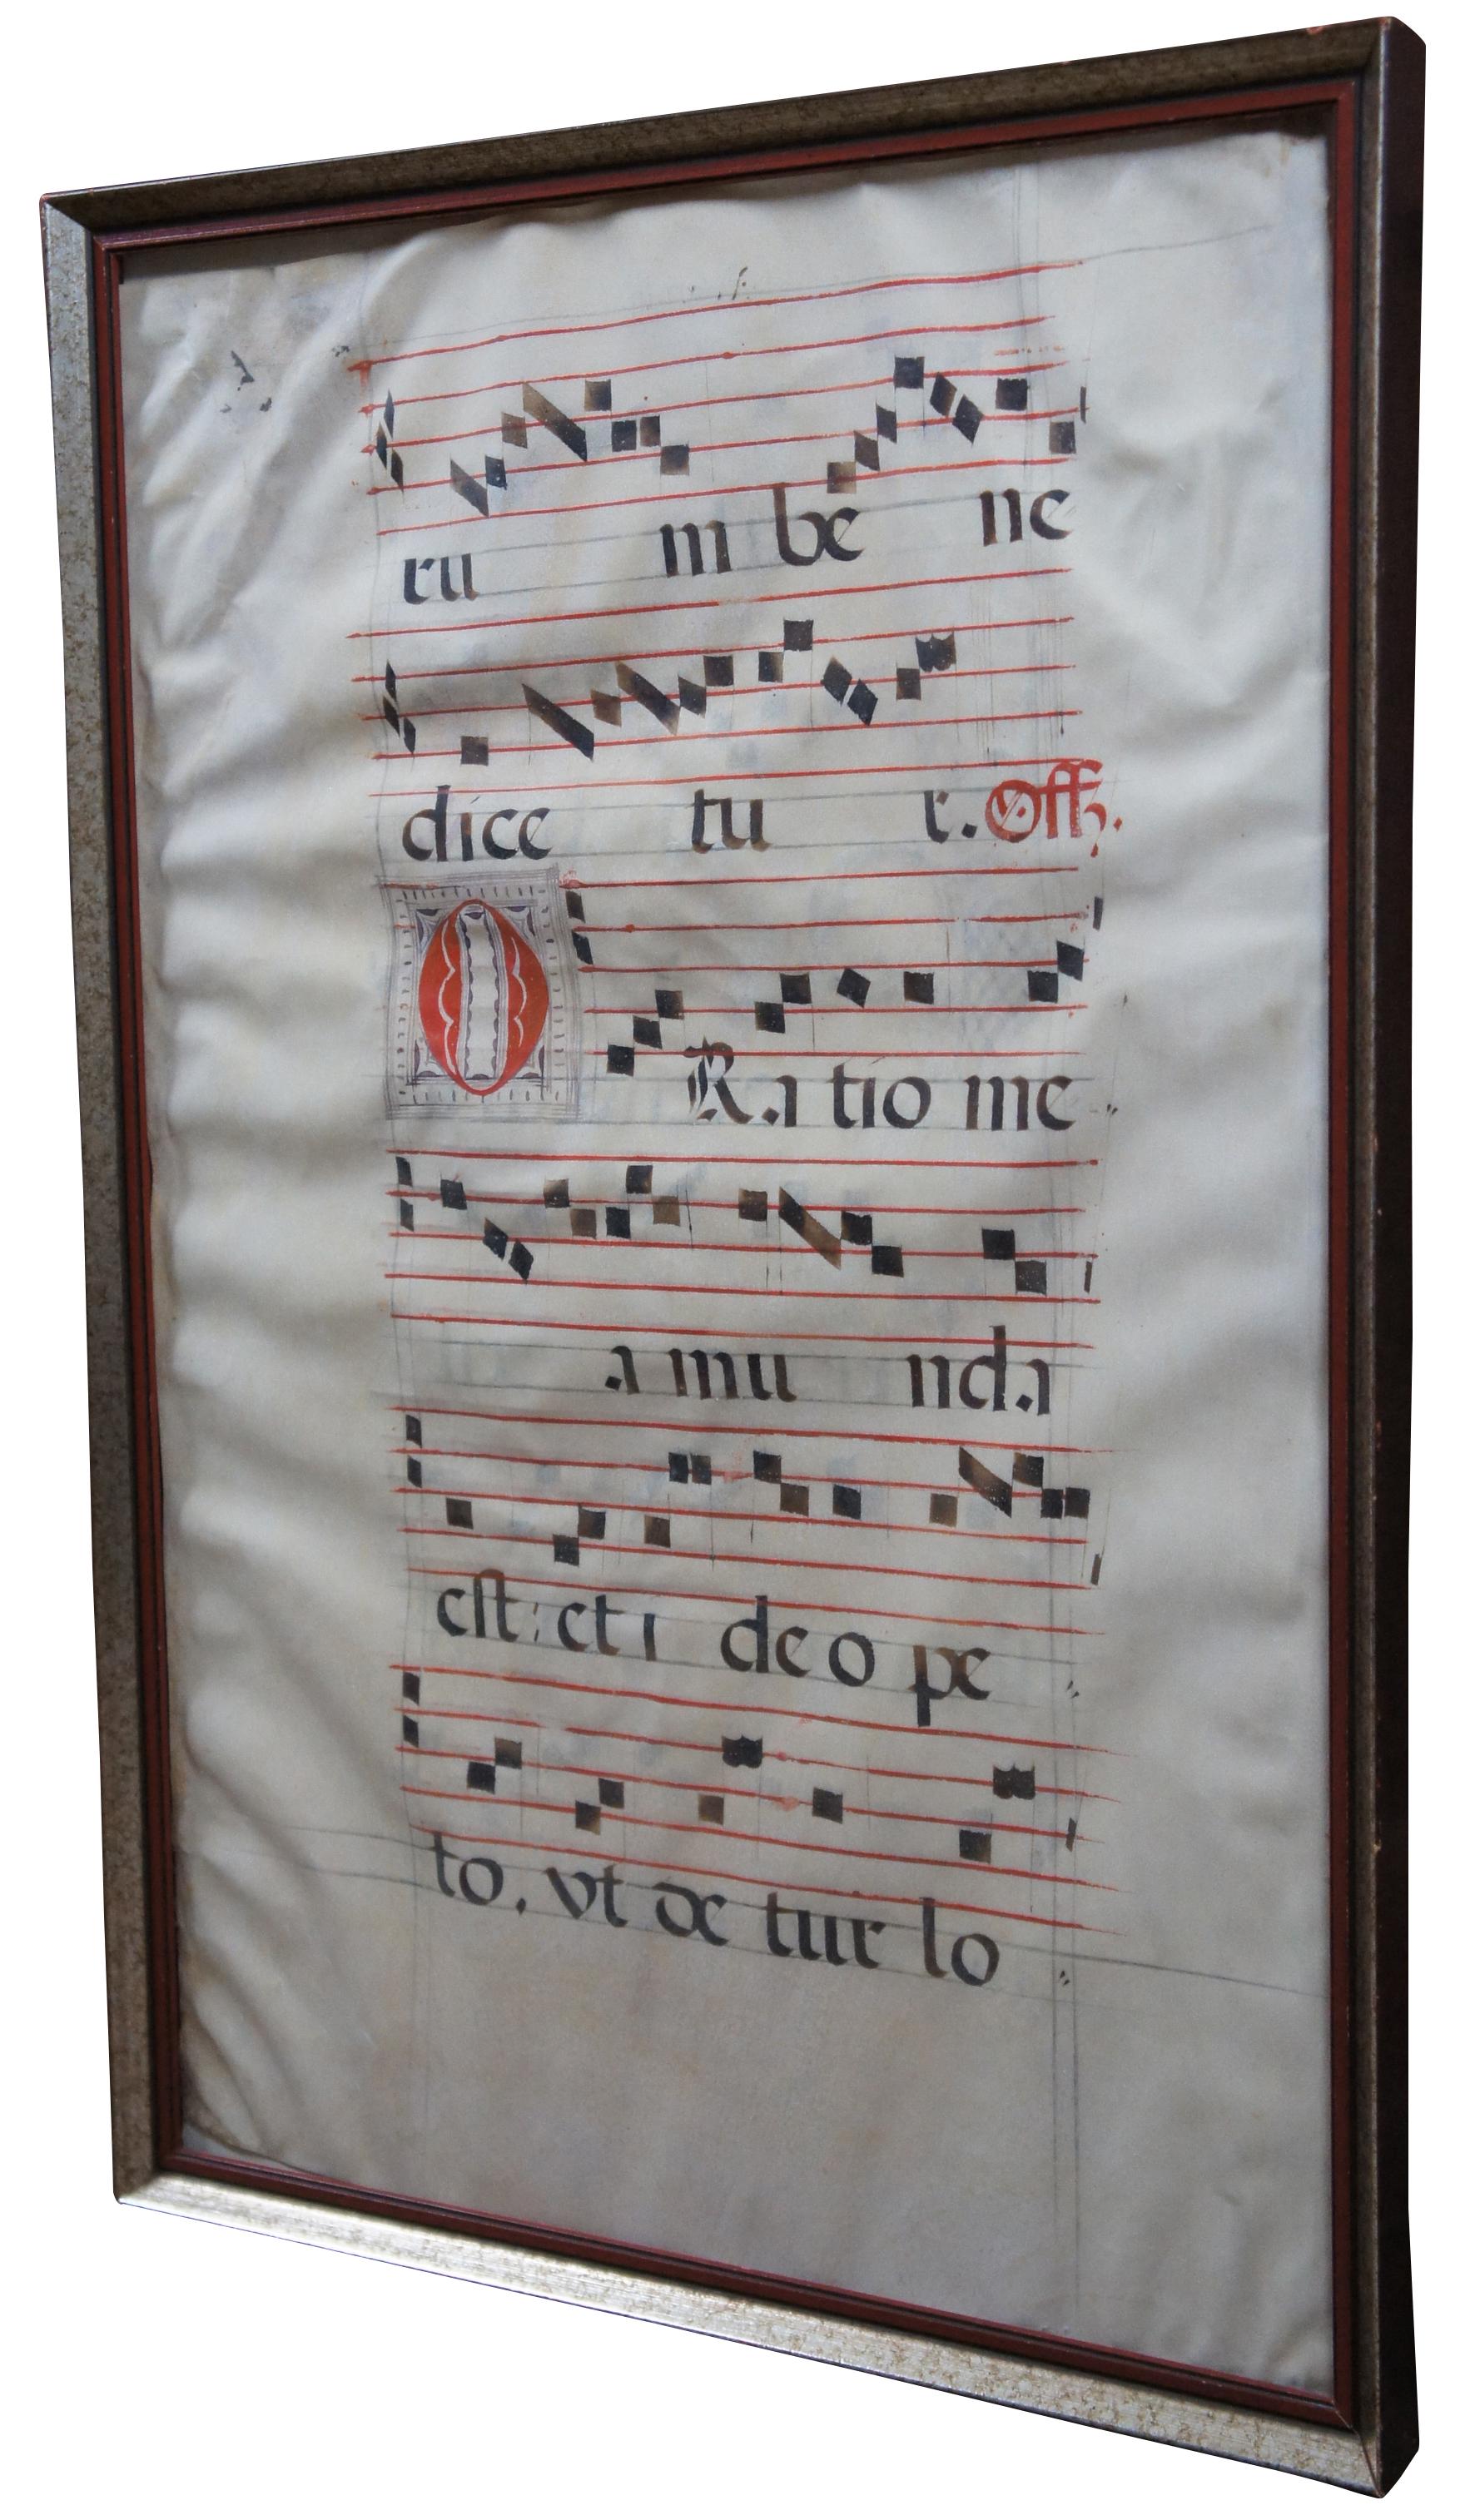 Framed 17th century Roman Catholic sheet music hand written in Latin on vellum in red and black ink.

Measures: Sans frame 18” x 27.625”.
  